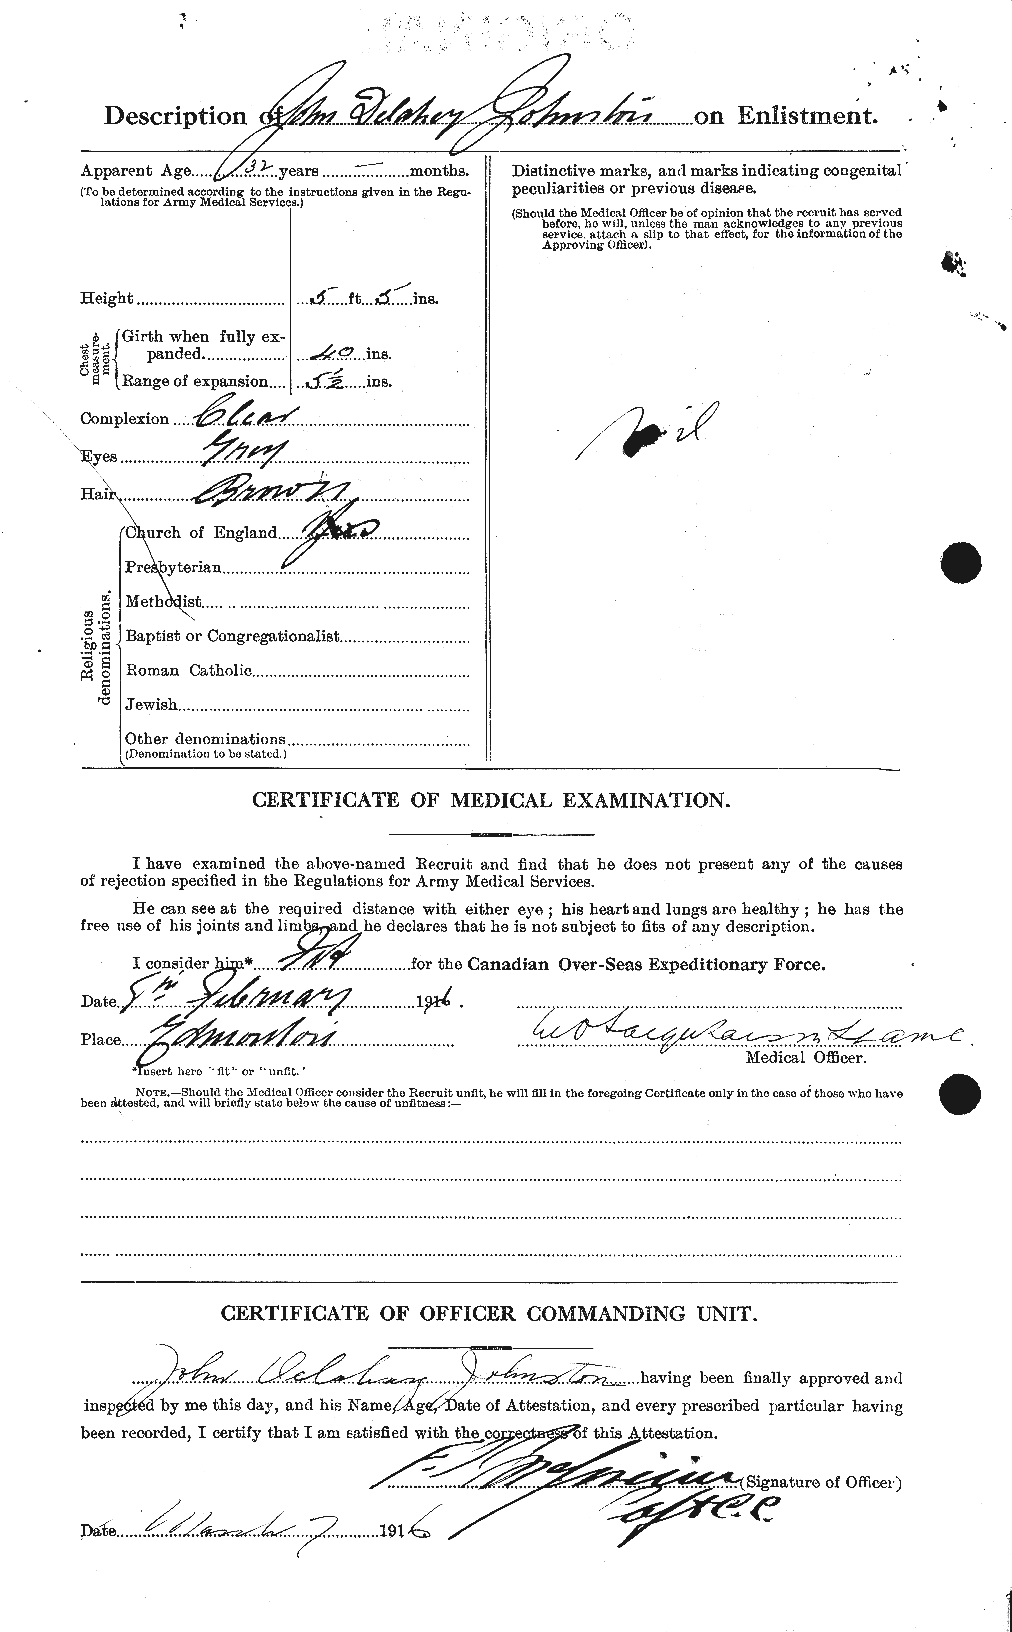 Personnel Records of the First World War - CEF 422821b